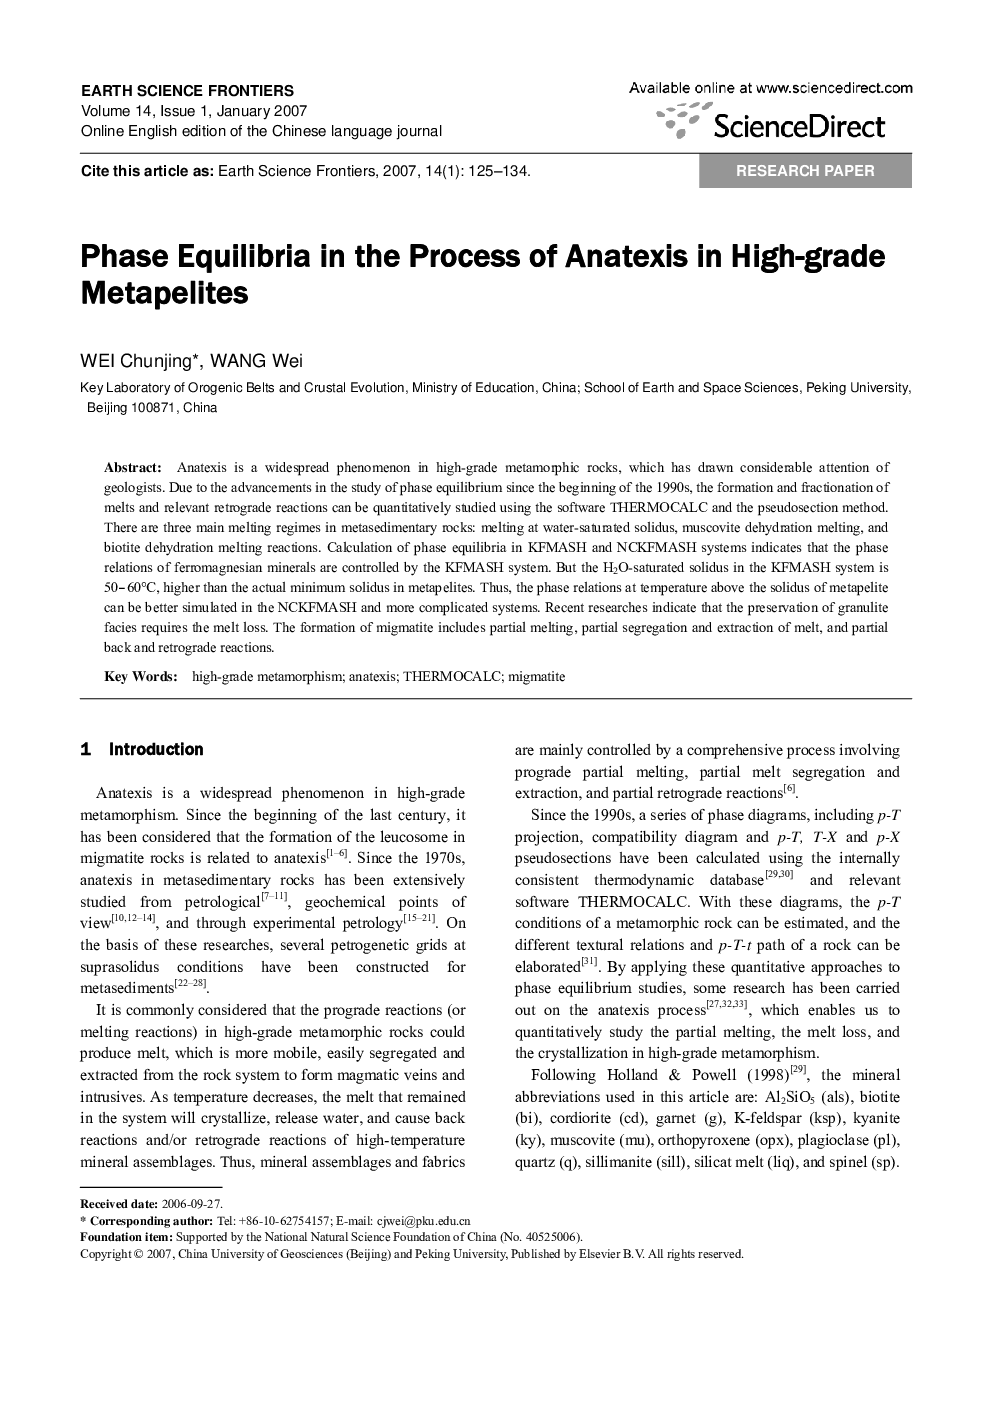 Phase Equilibria in the Process of Anatexis in High-grade Metapelites 